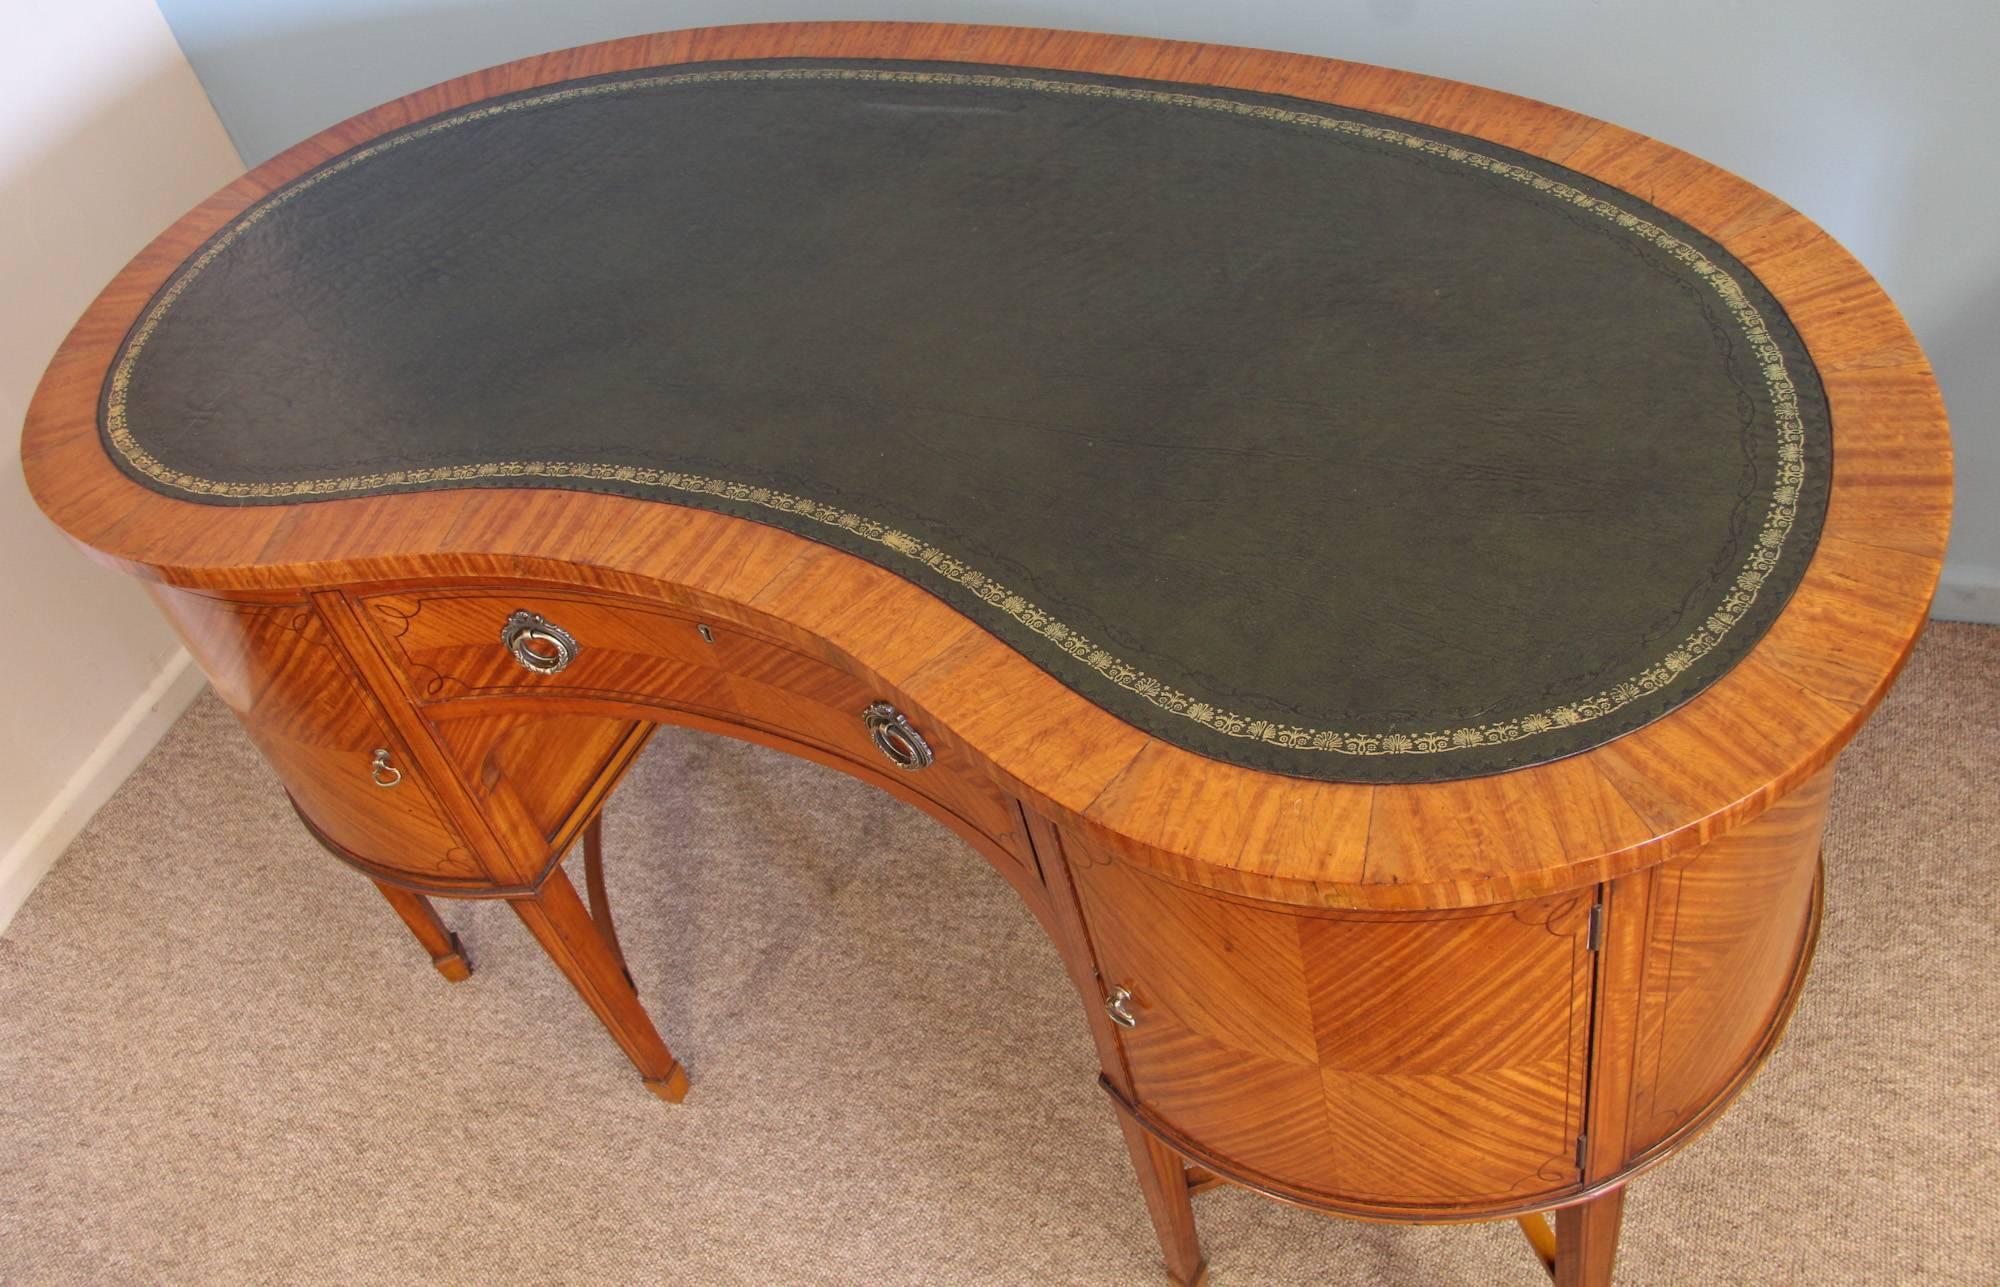 Satinwood kidney shaped desk with quarter veneered door panels on square tapering feet, circa 1890.

All of the items that we advertise for sale have been as accurately described as possible and are in excellent condition, unless otherwise stated.